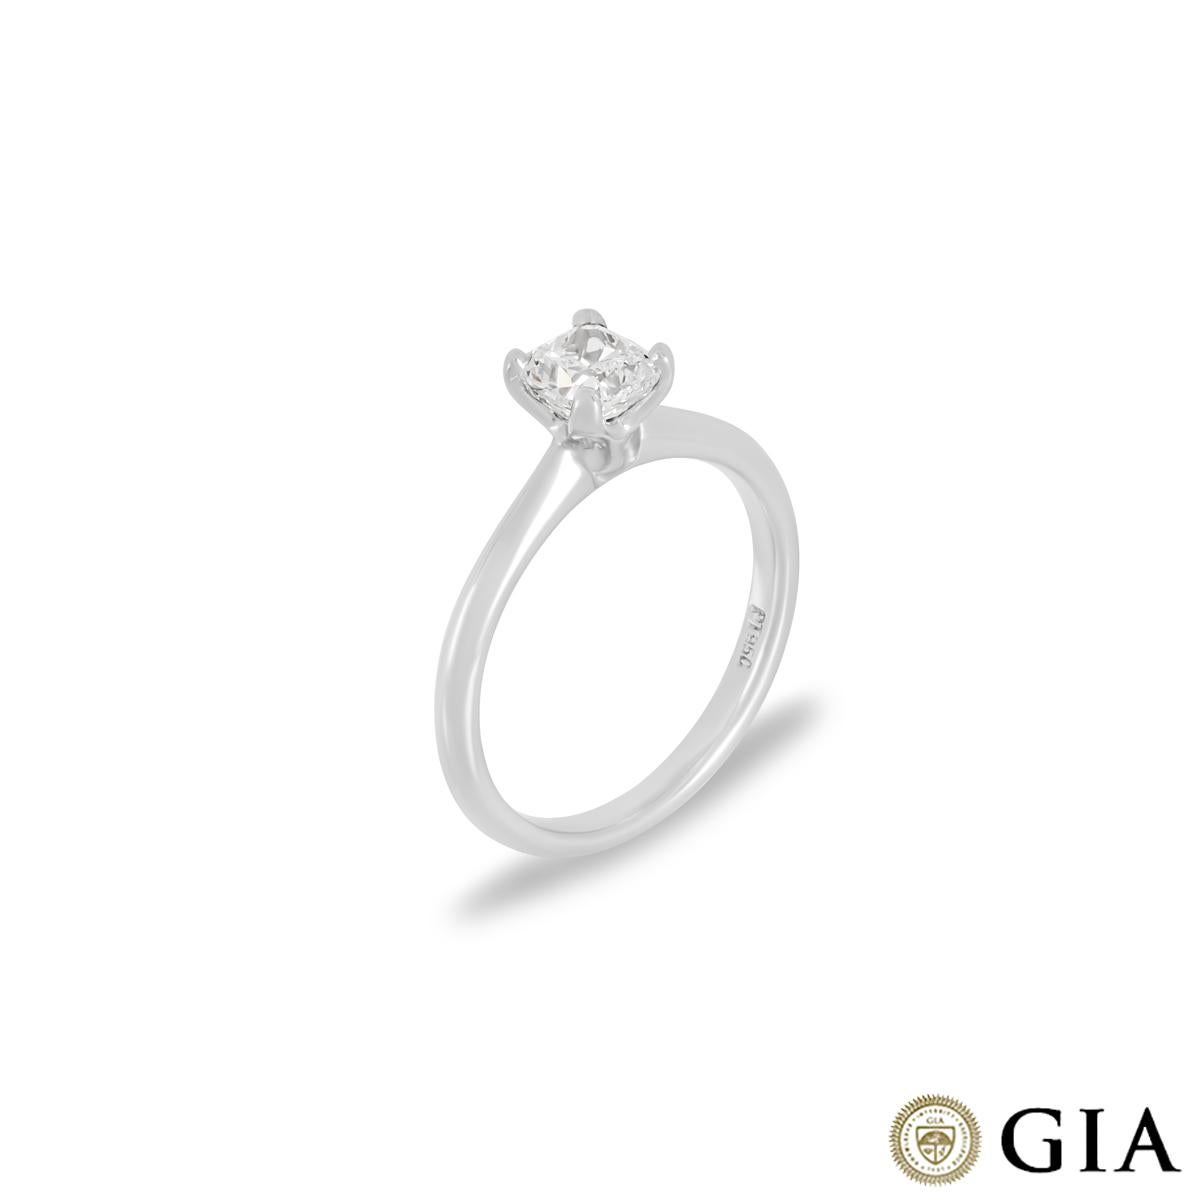 A beautiful platinum cushion cut diamond ring. The platinum ring comprises of a cushion cut diamond in a four claw setting with a weight of 0.81ct, H colour and VVS1 clarity. The ring is a size UK M½, EU 52½ and US 6 1⁄4 but can be adjusted for a